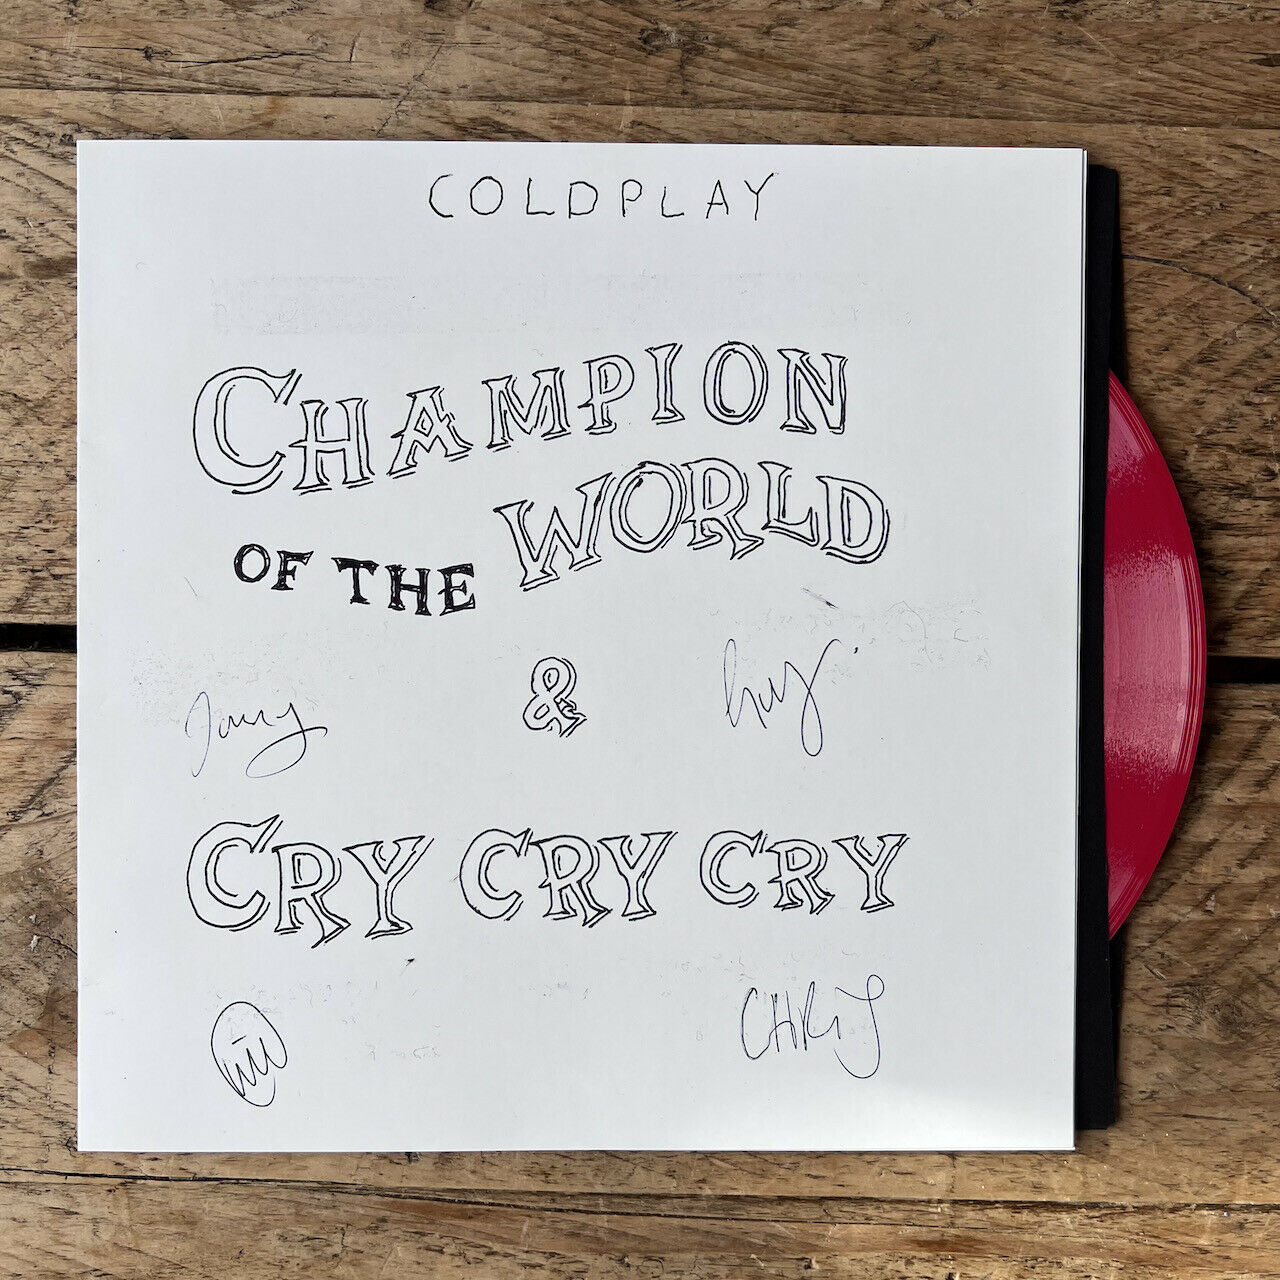 Pic 1 One-off Coldplay Champion Of The World 7-inch vinyl